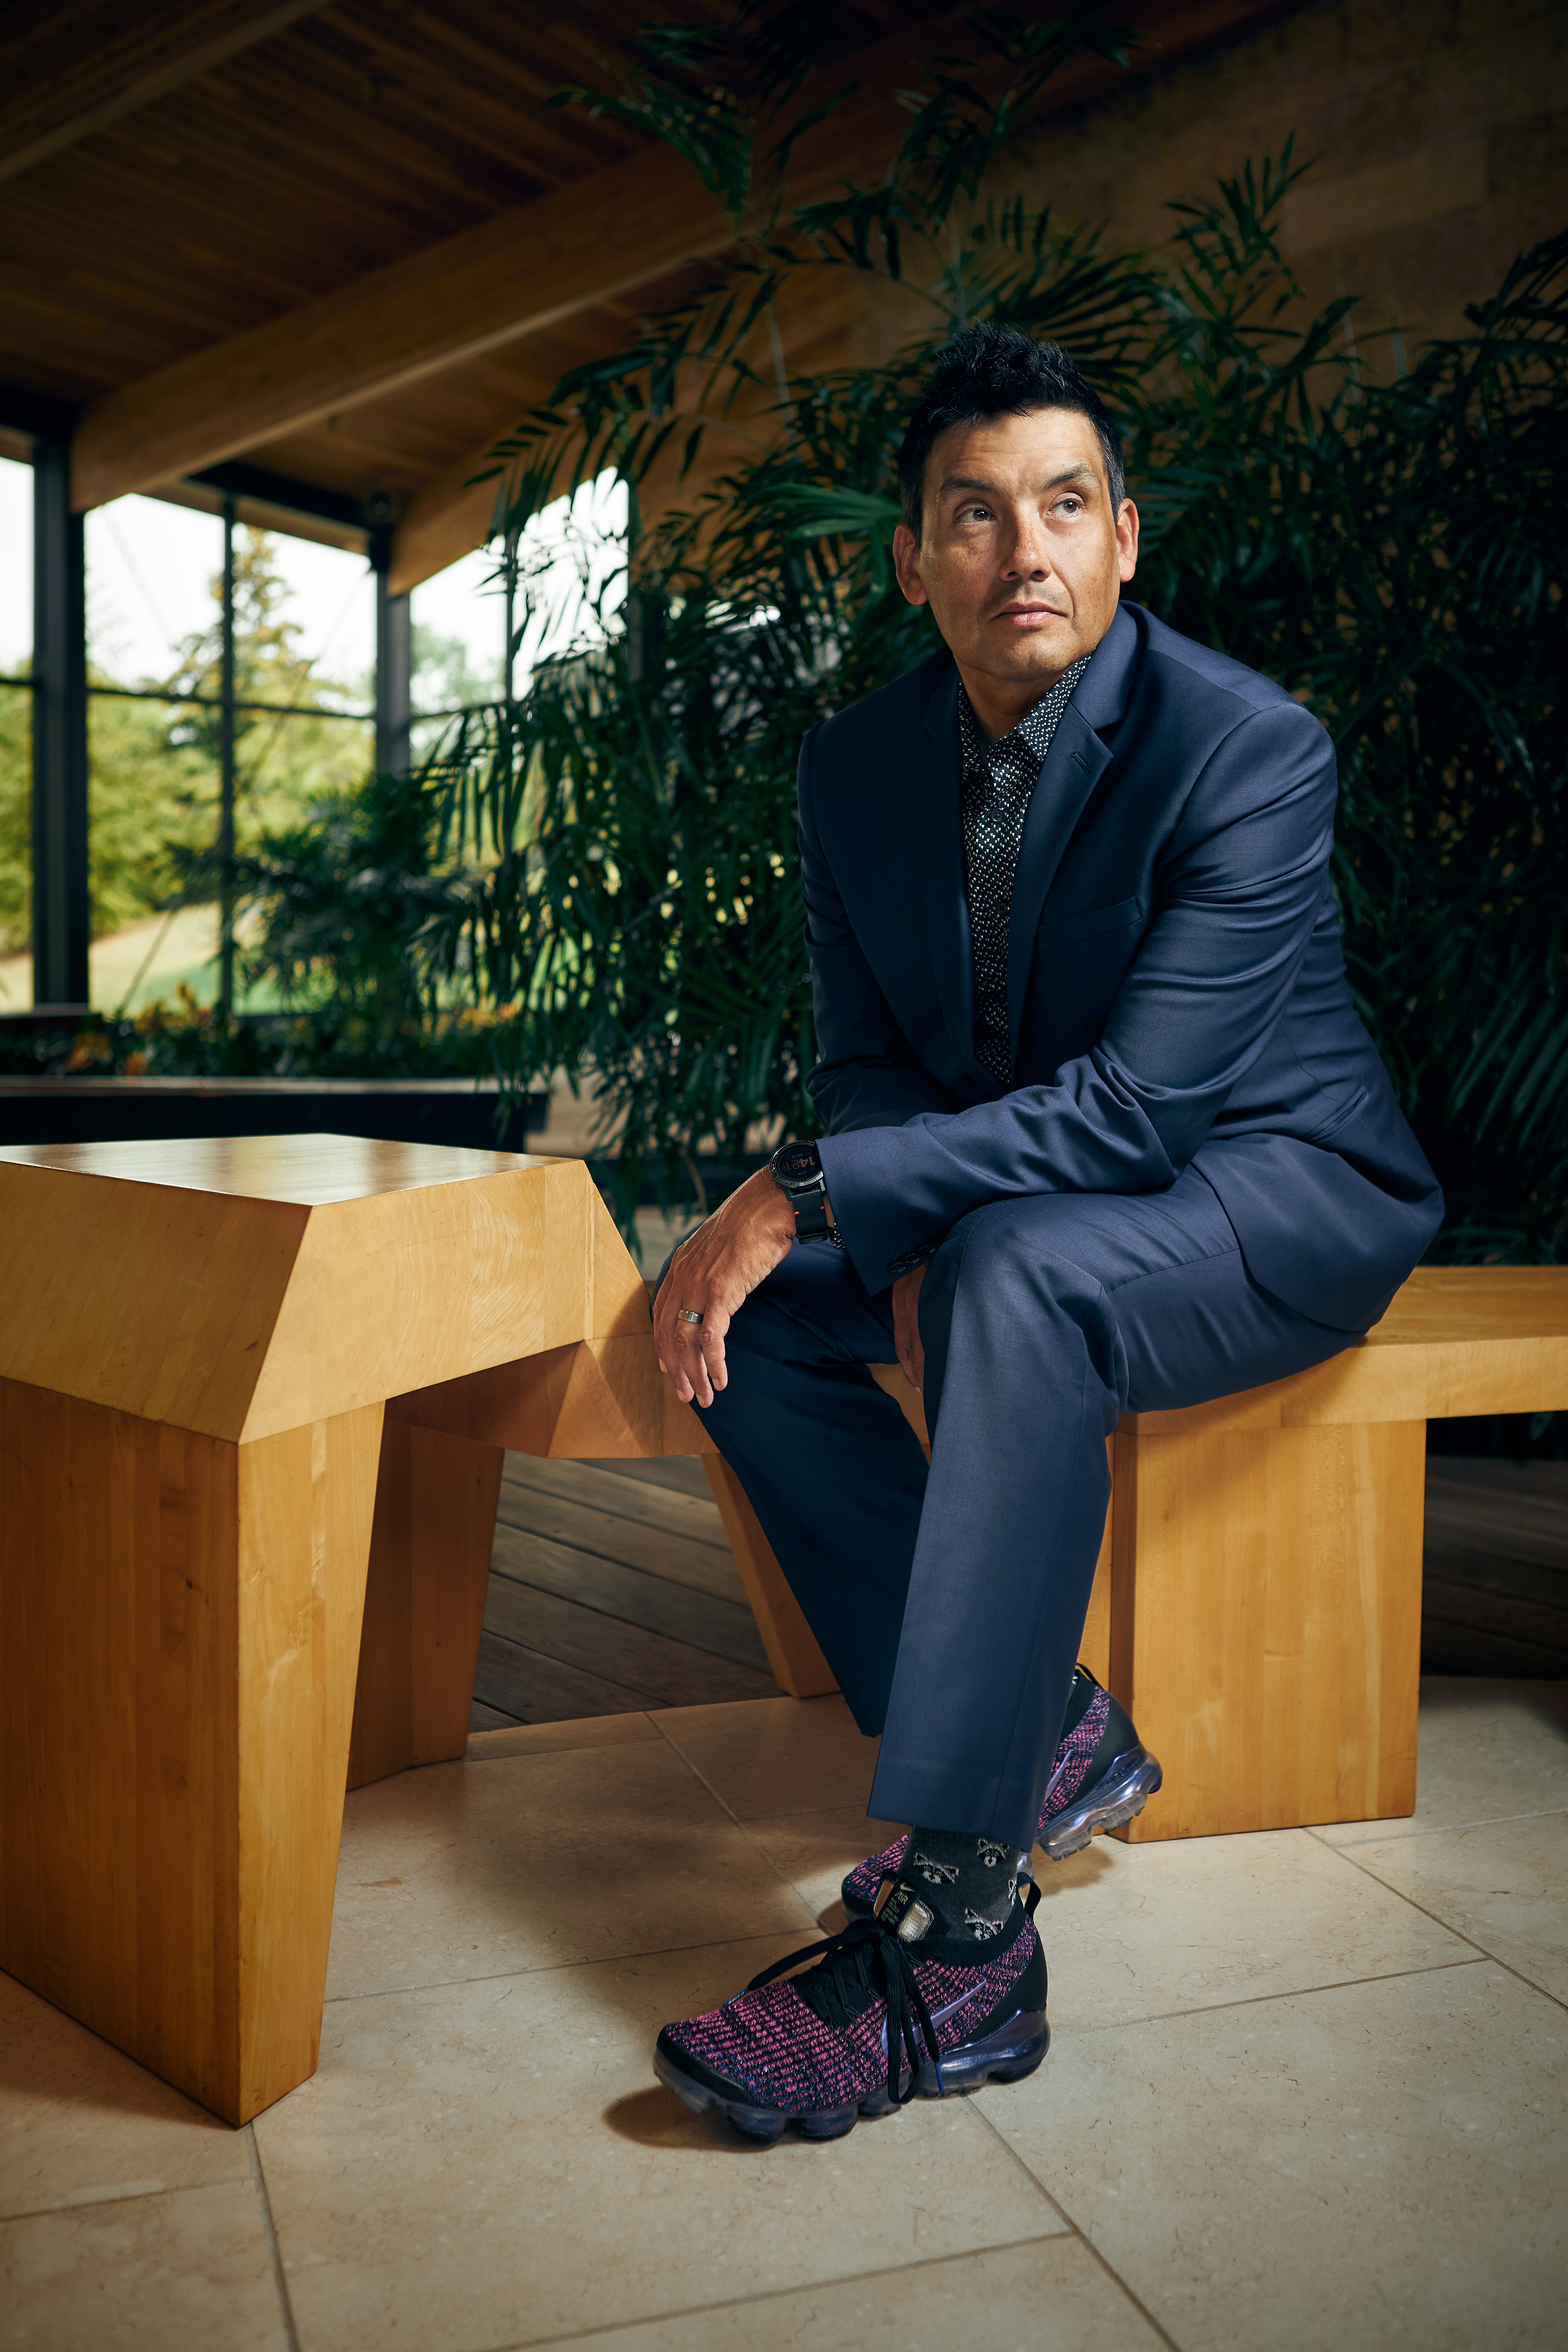 Portrait of Chris Cornelius in suit and sneakers sitting on wooden bench inside a house